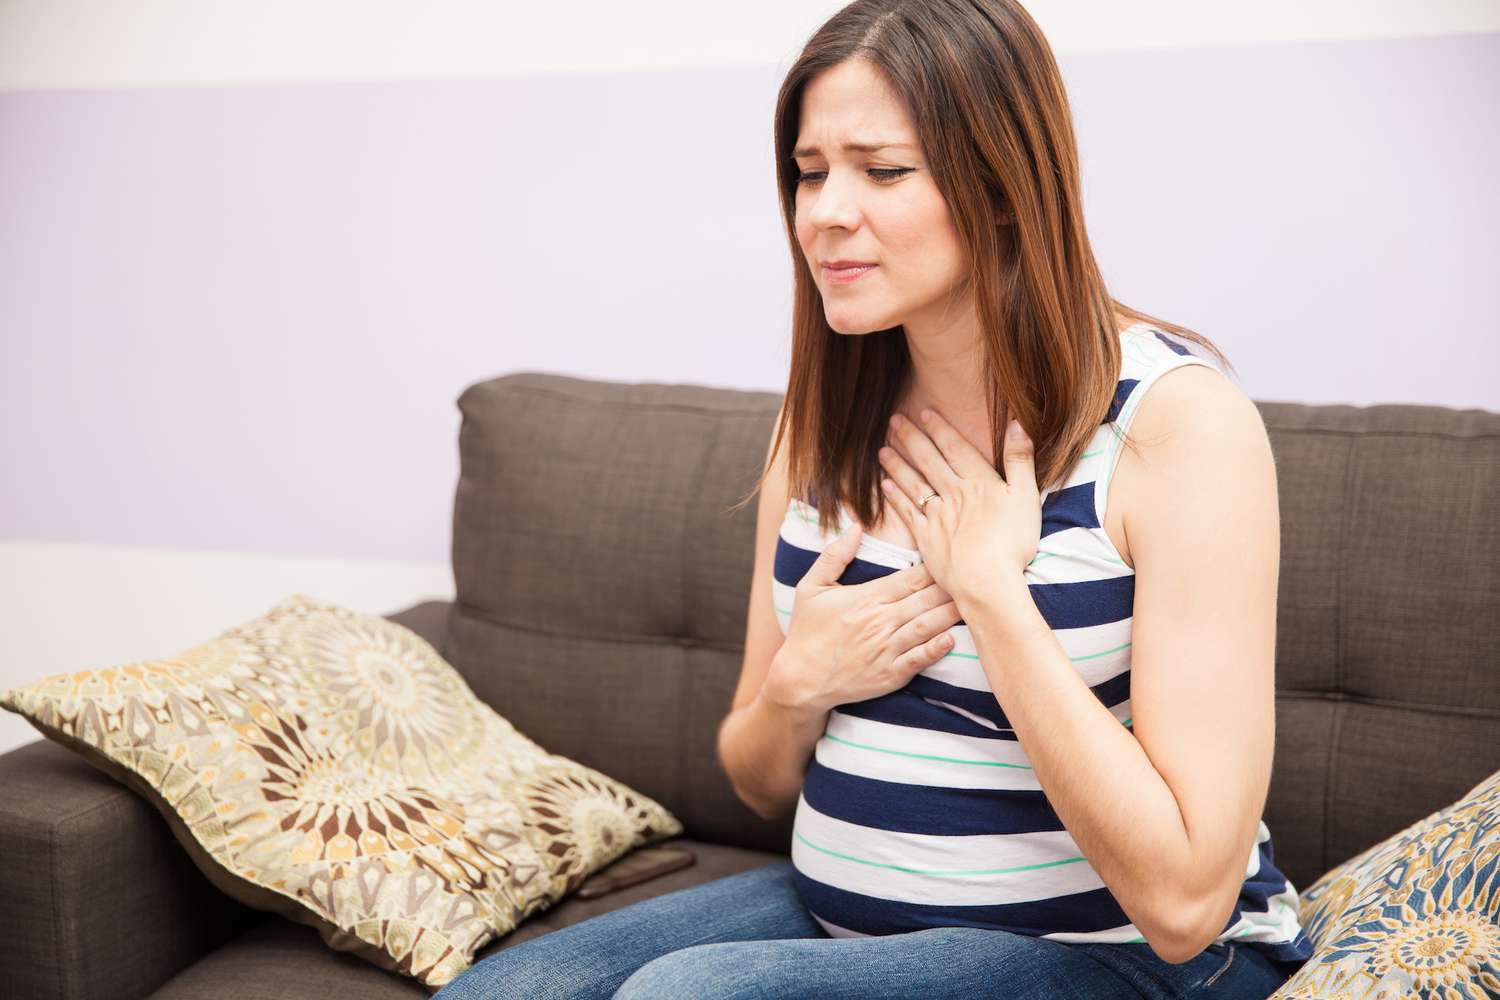 What are the Symptoms of Heartburn Pregnancy and the Treatment for Heartburn Pregnancy?